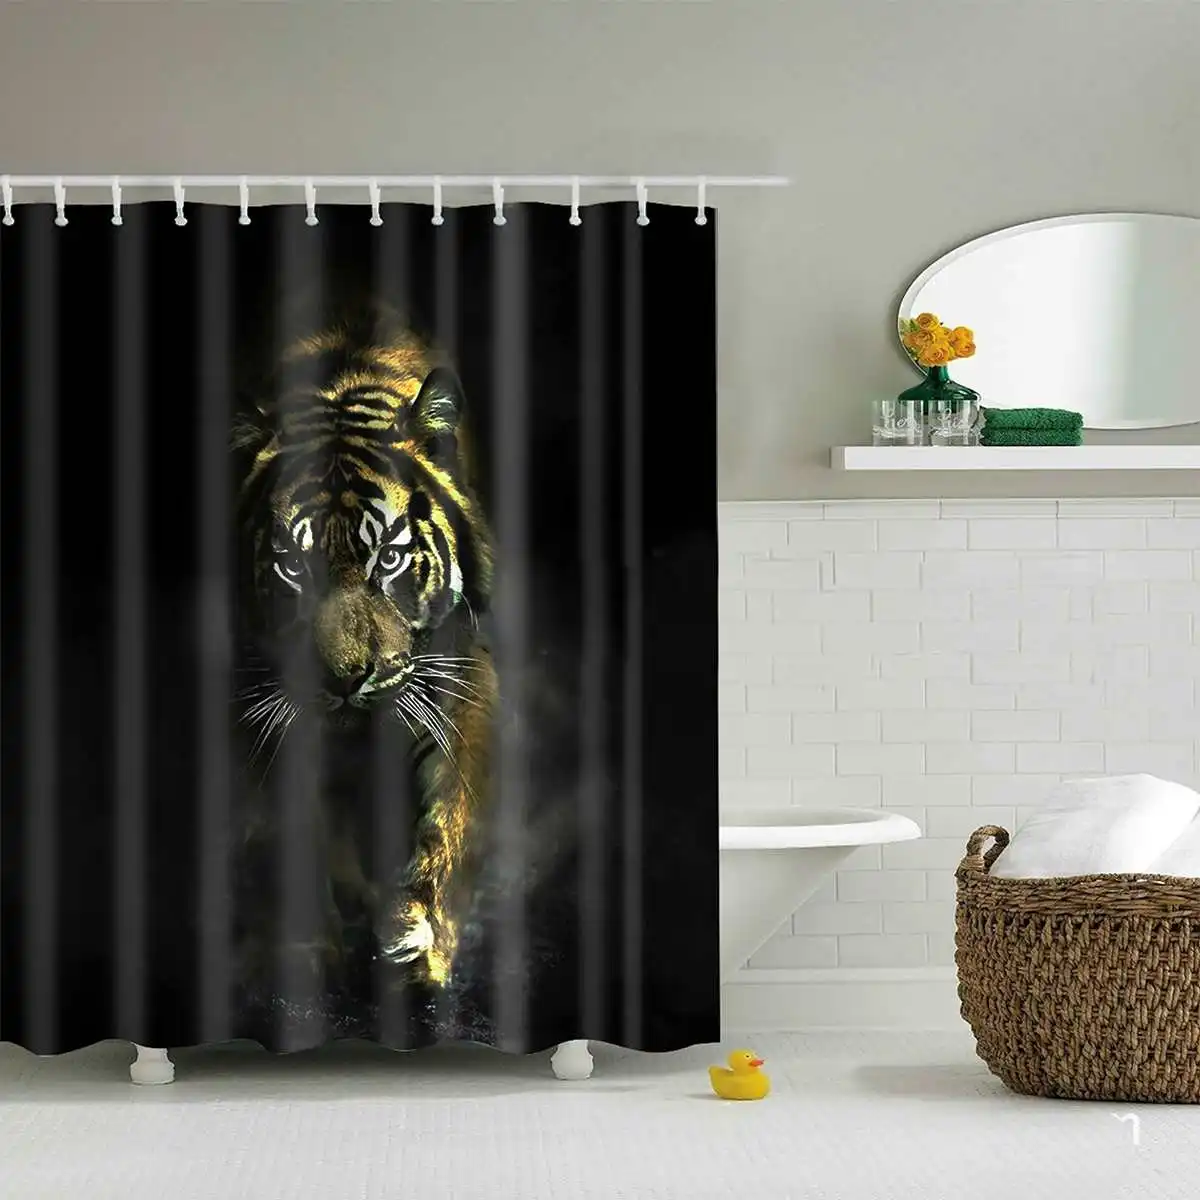 Tiger pattern Shower Curtain Bathroom Waterproof Polyester Fabric with 12 Hooks 